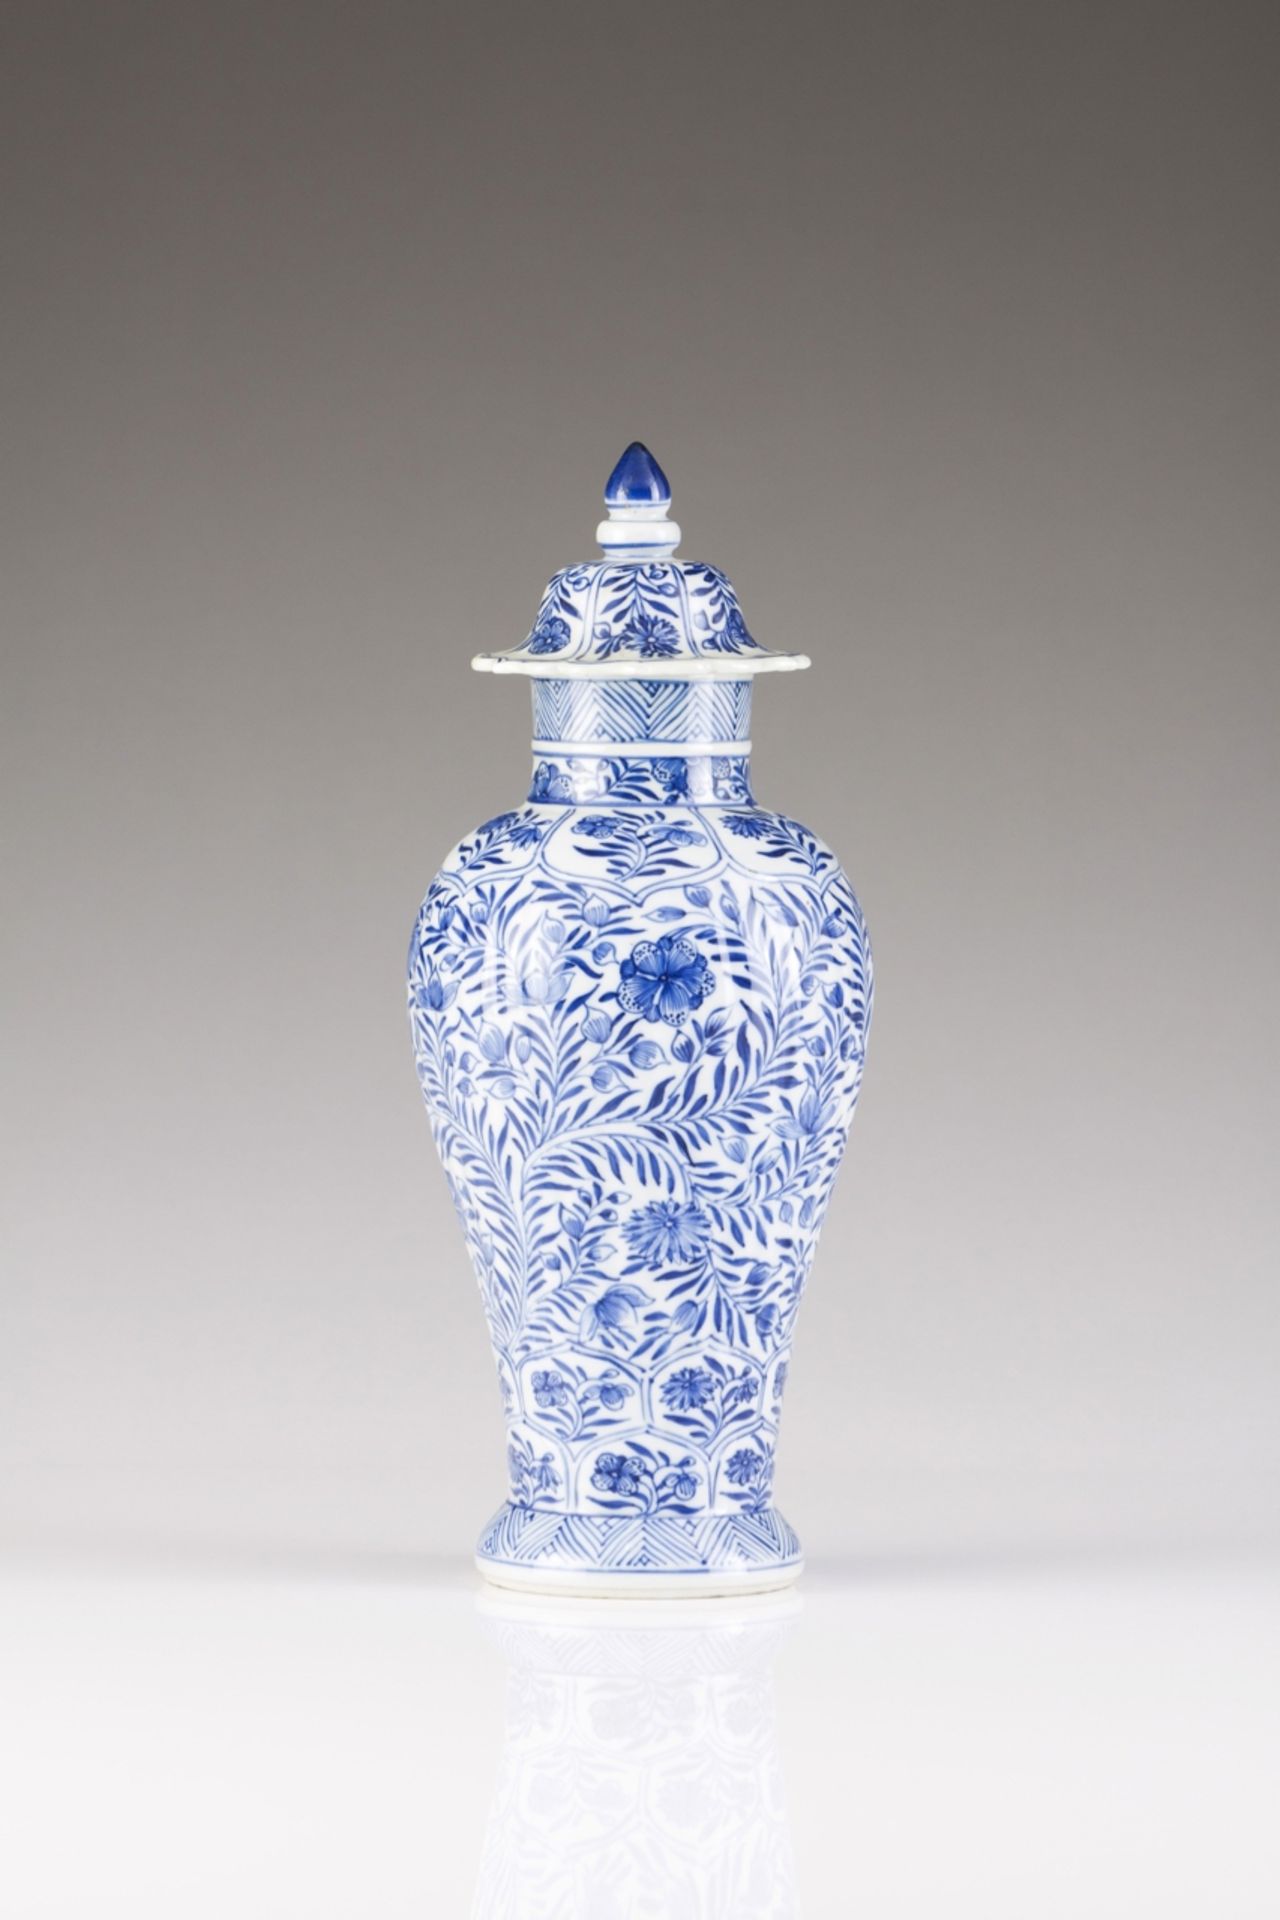 A Kangxi vase with cover
Chinese porcelain
Blue decoration depicting flowers
Kangxi Period (1662-